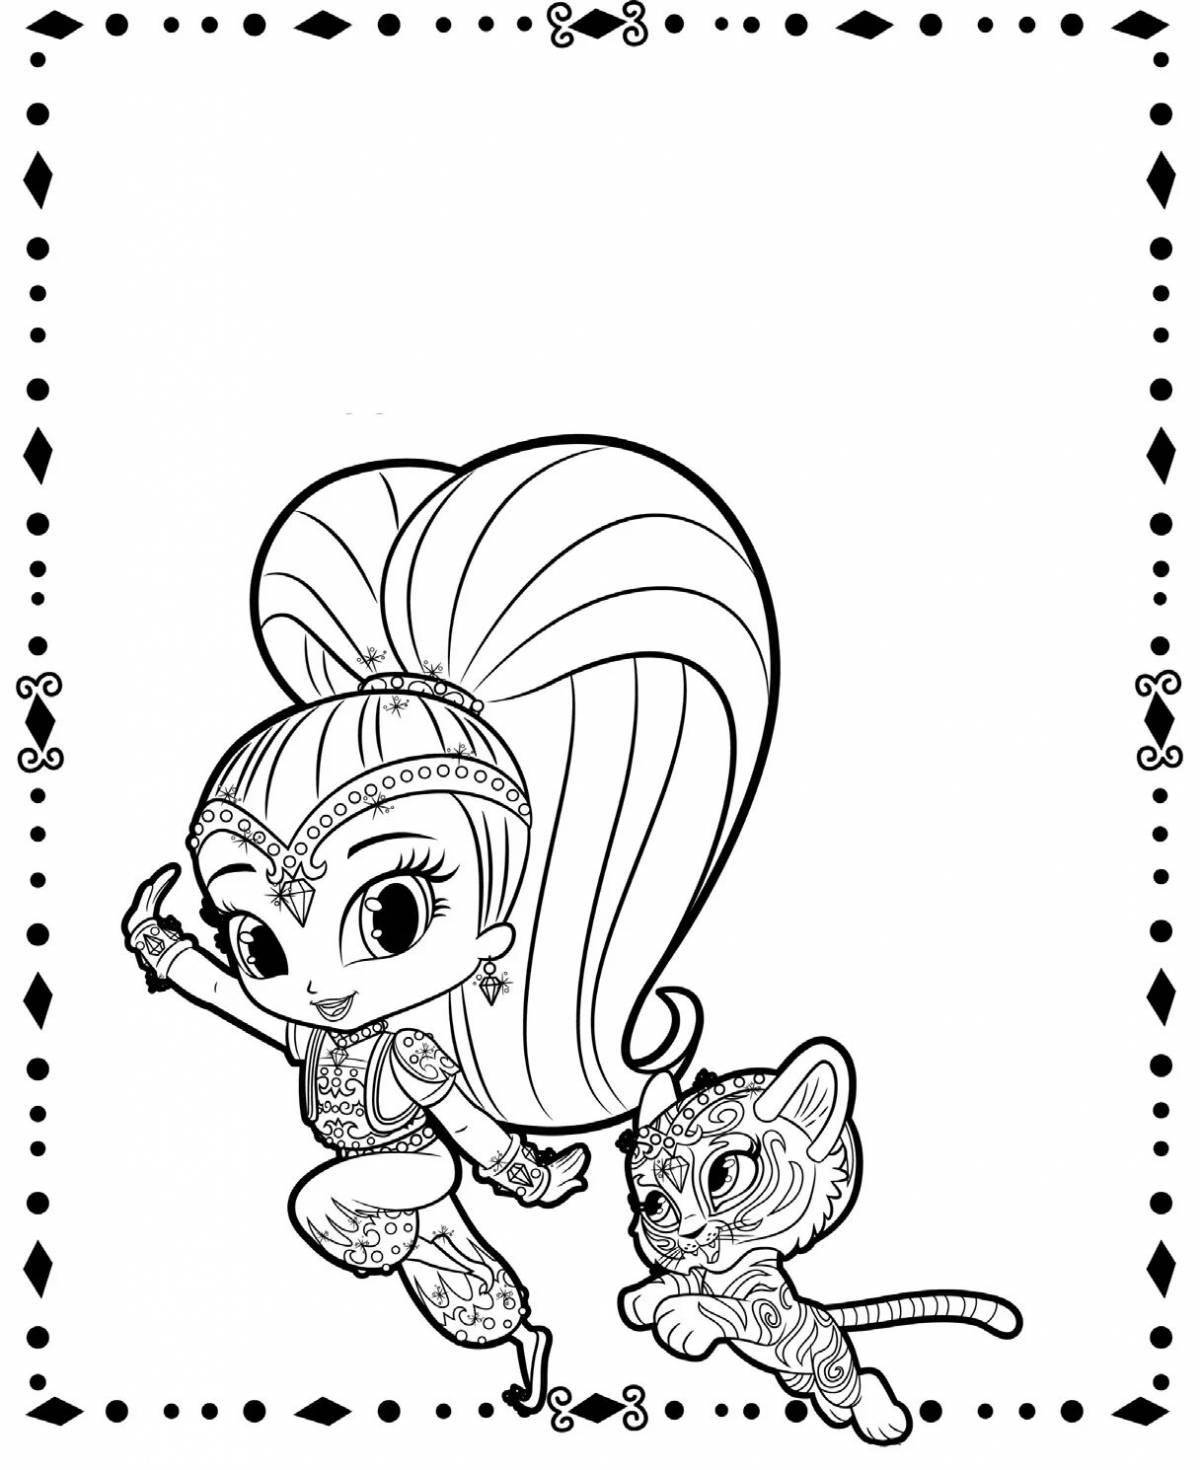 Shimmer and shine coloring book for kids